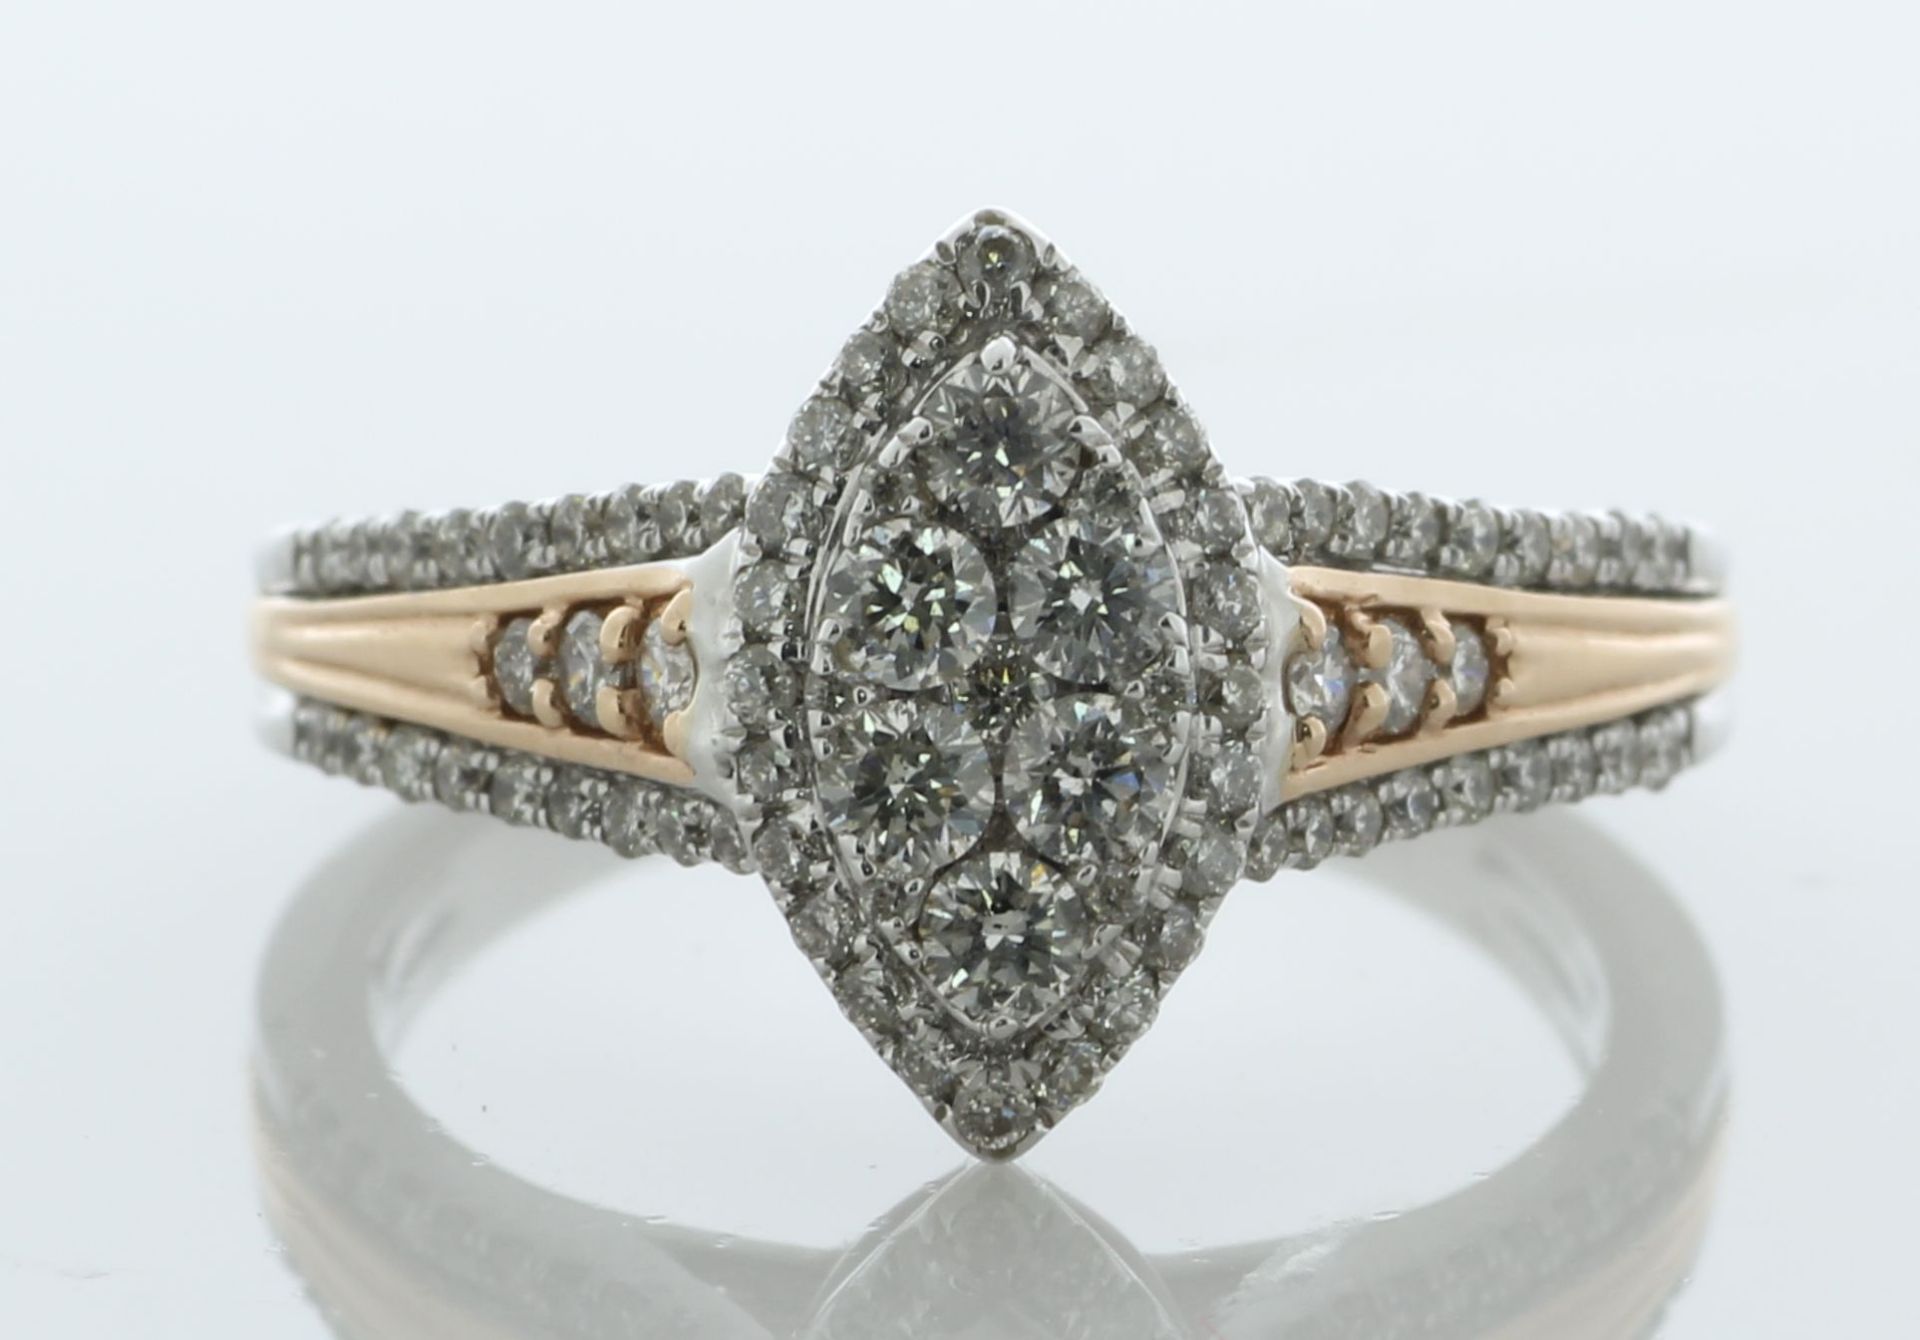 14ct Gold Diamond Cluster Ring 1.05 Carats - Valued By AGI £4,195.00 - A stunning two tone white